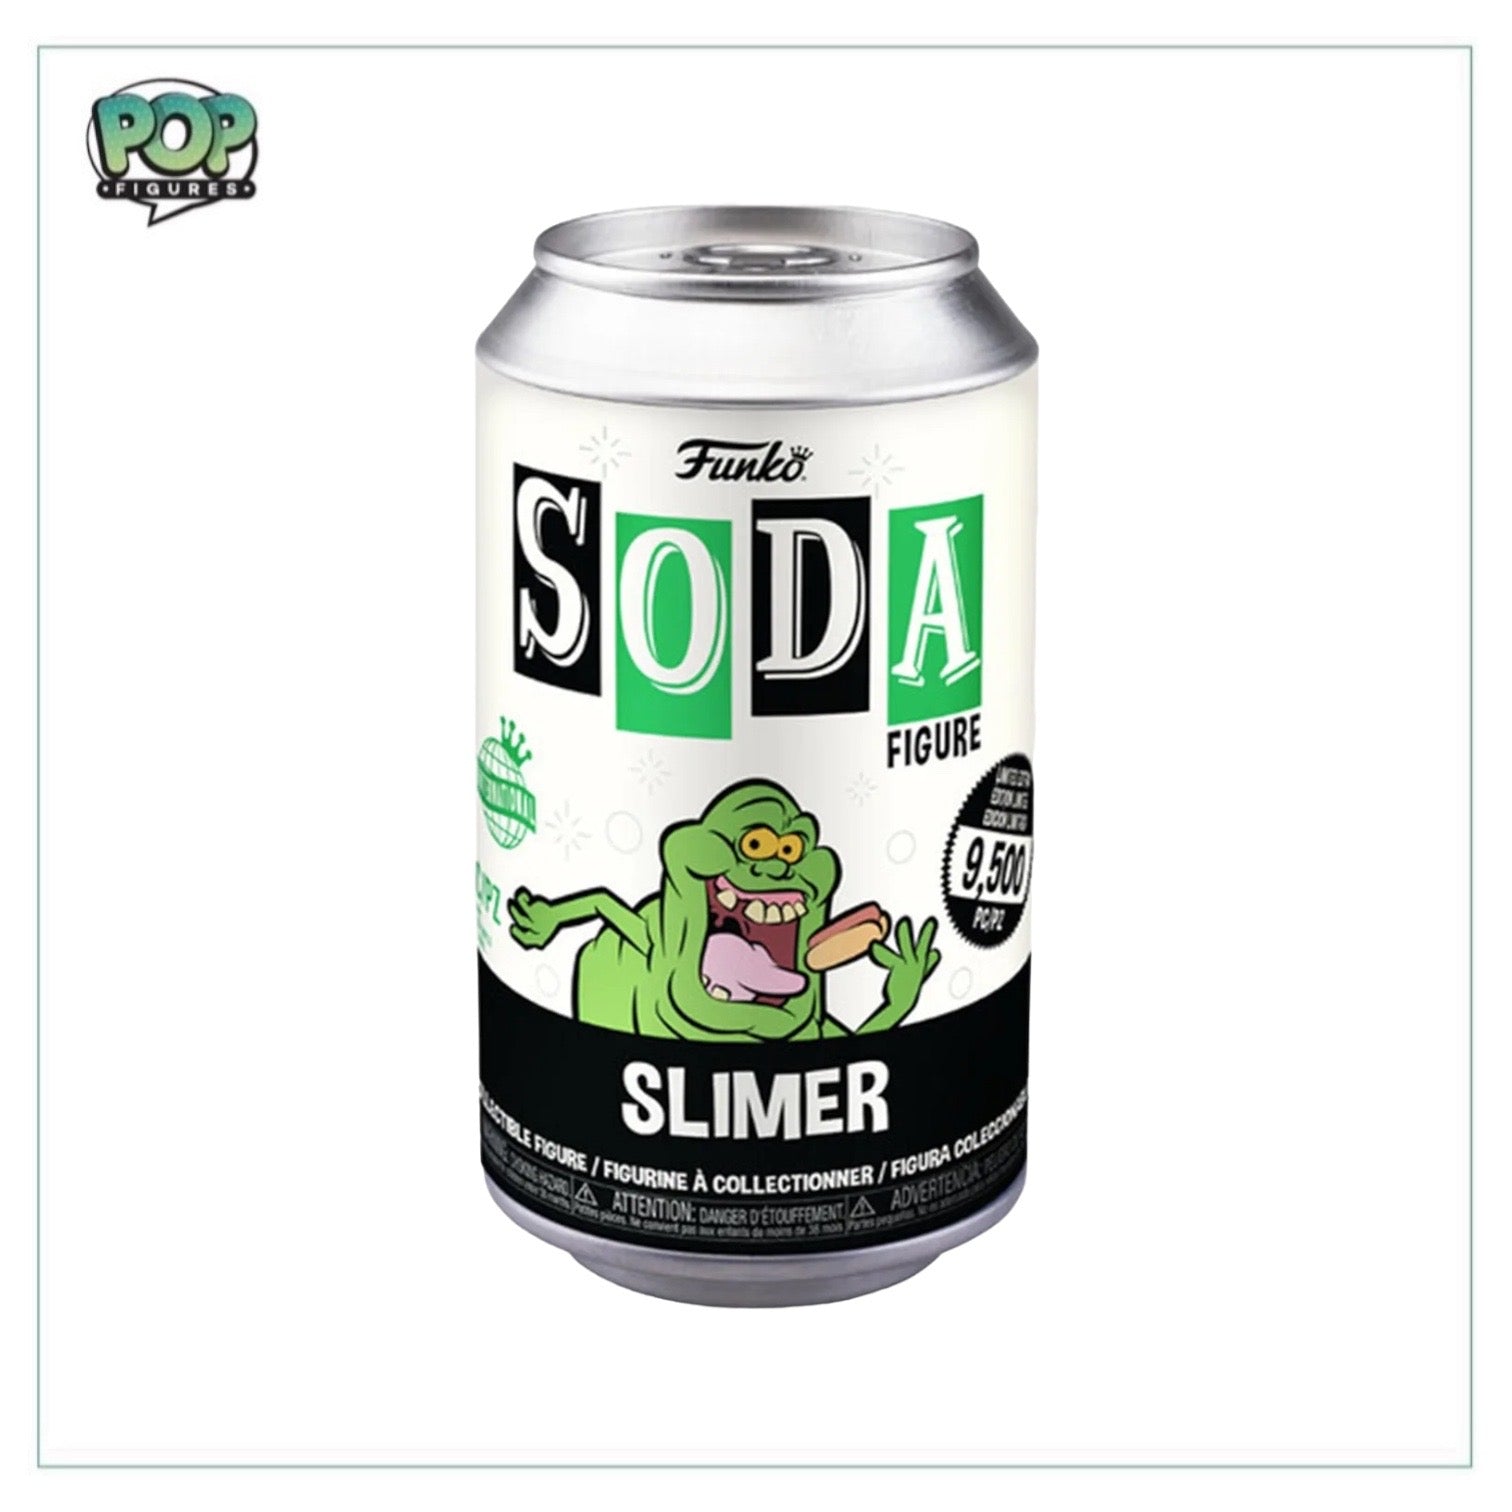 Slimer Funko Soda Vinyl Figure! - Ghost Busters - International LE9500 Pcs - Chance of Chase